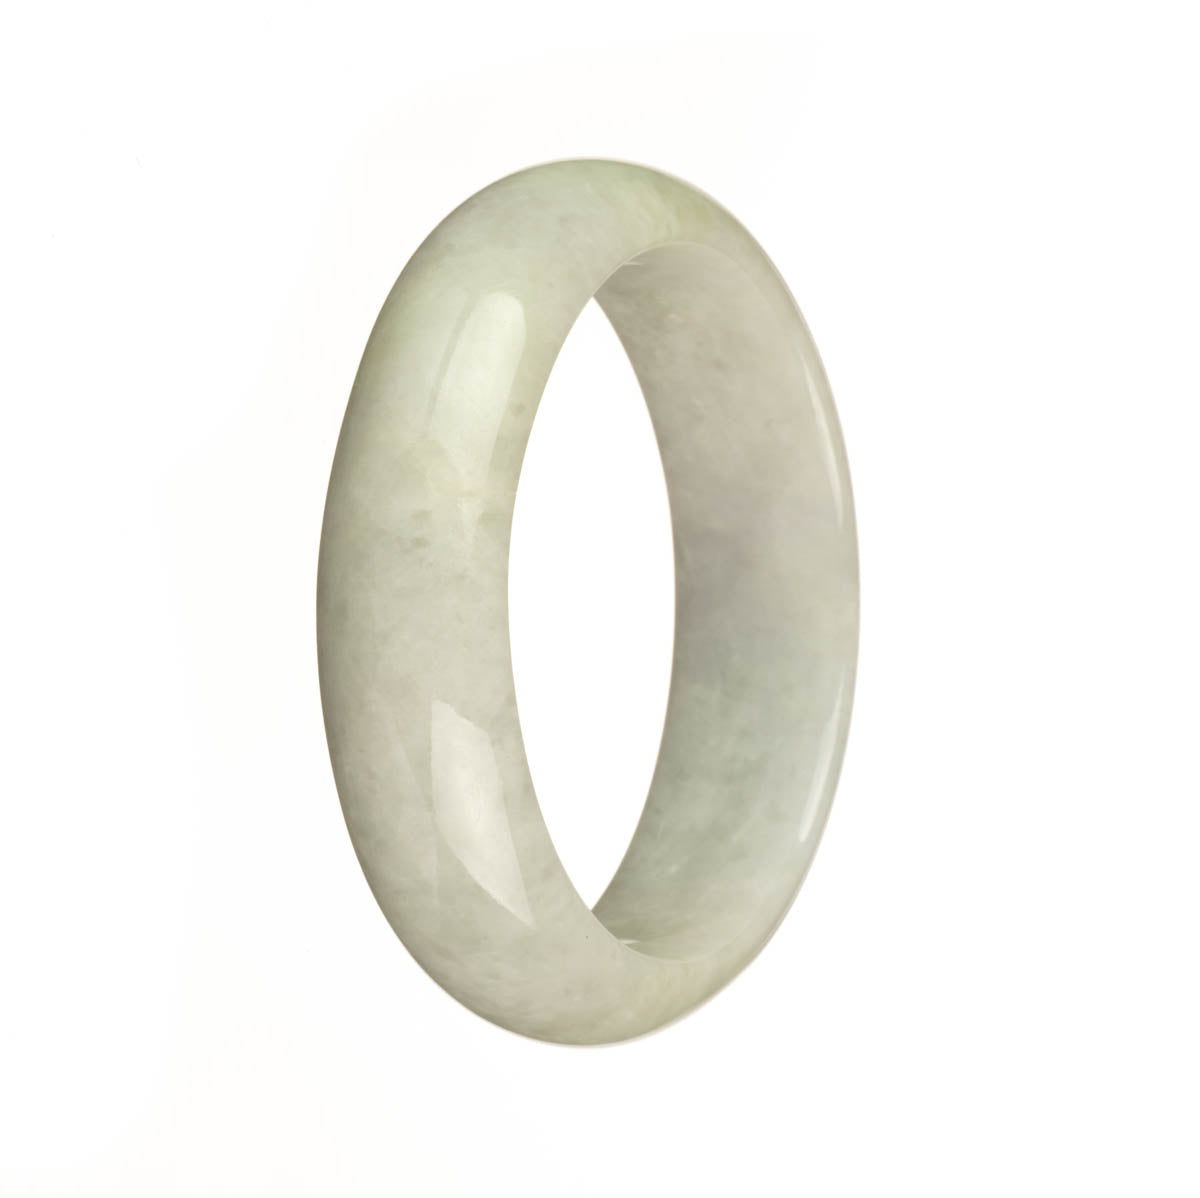 A half moon-shaped jade bangle with a greyish green color, certified as Type A Burma Jade, from MAYS GEMS.